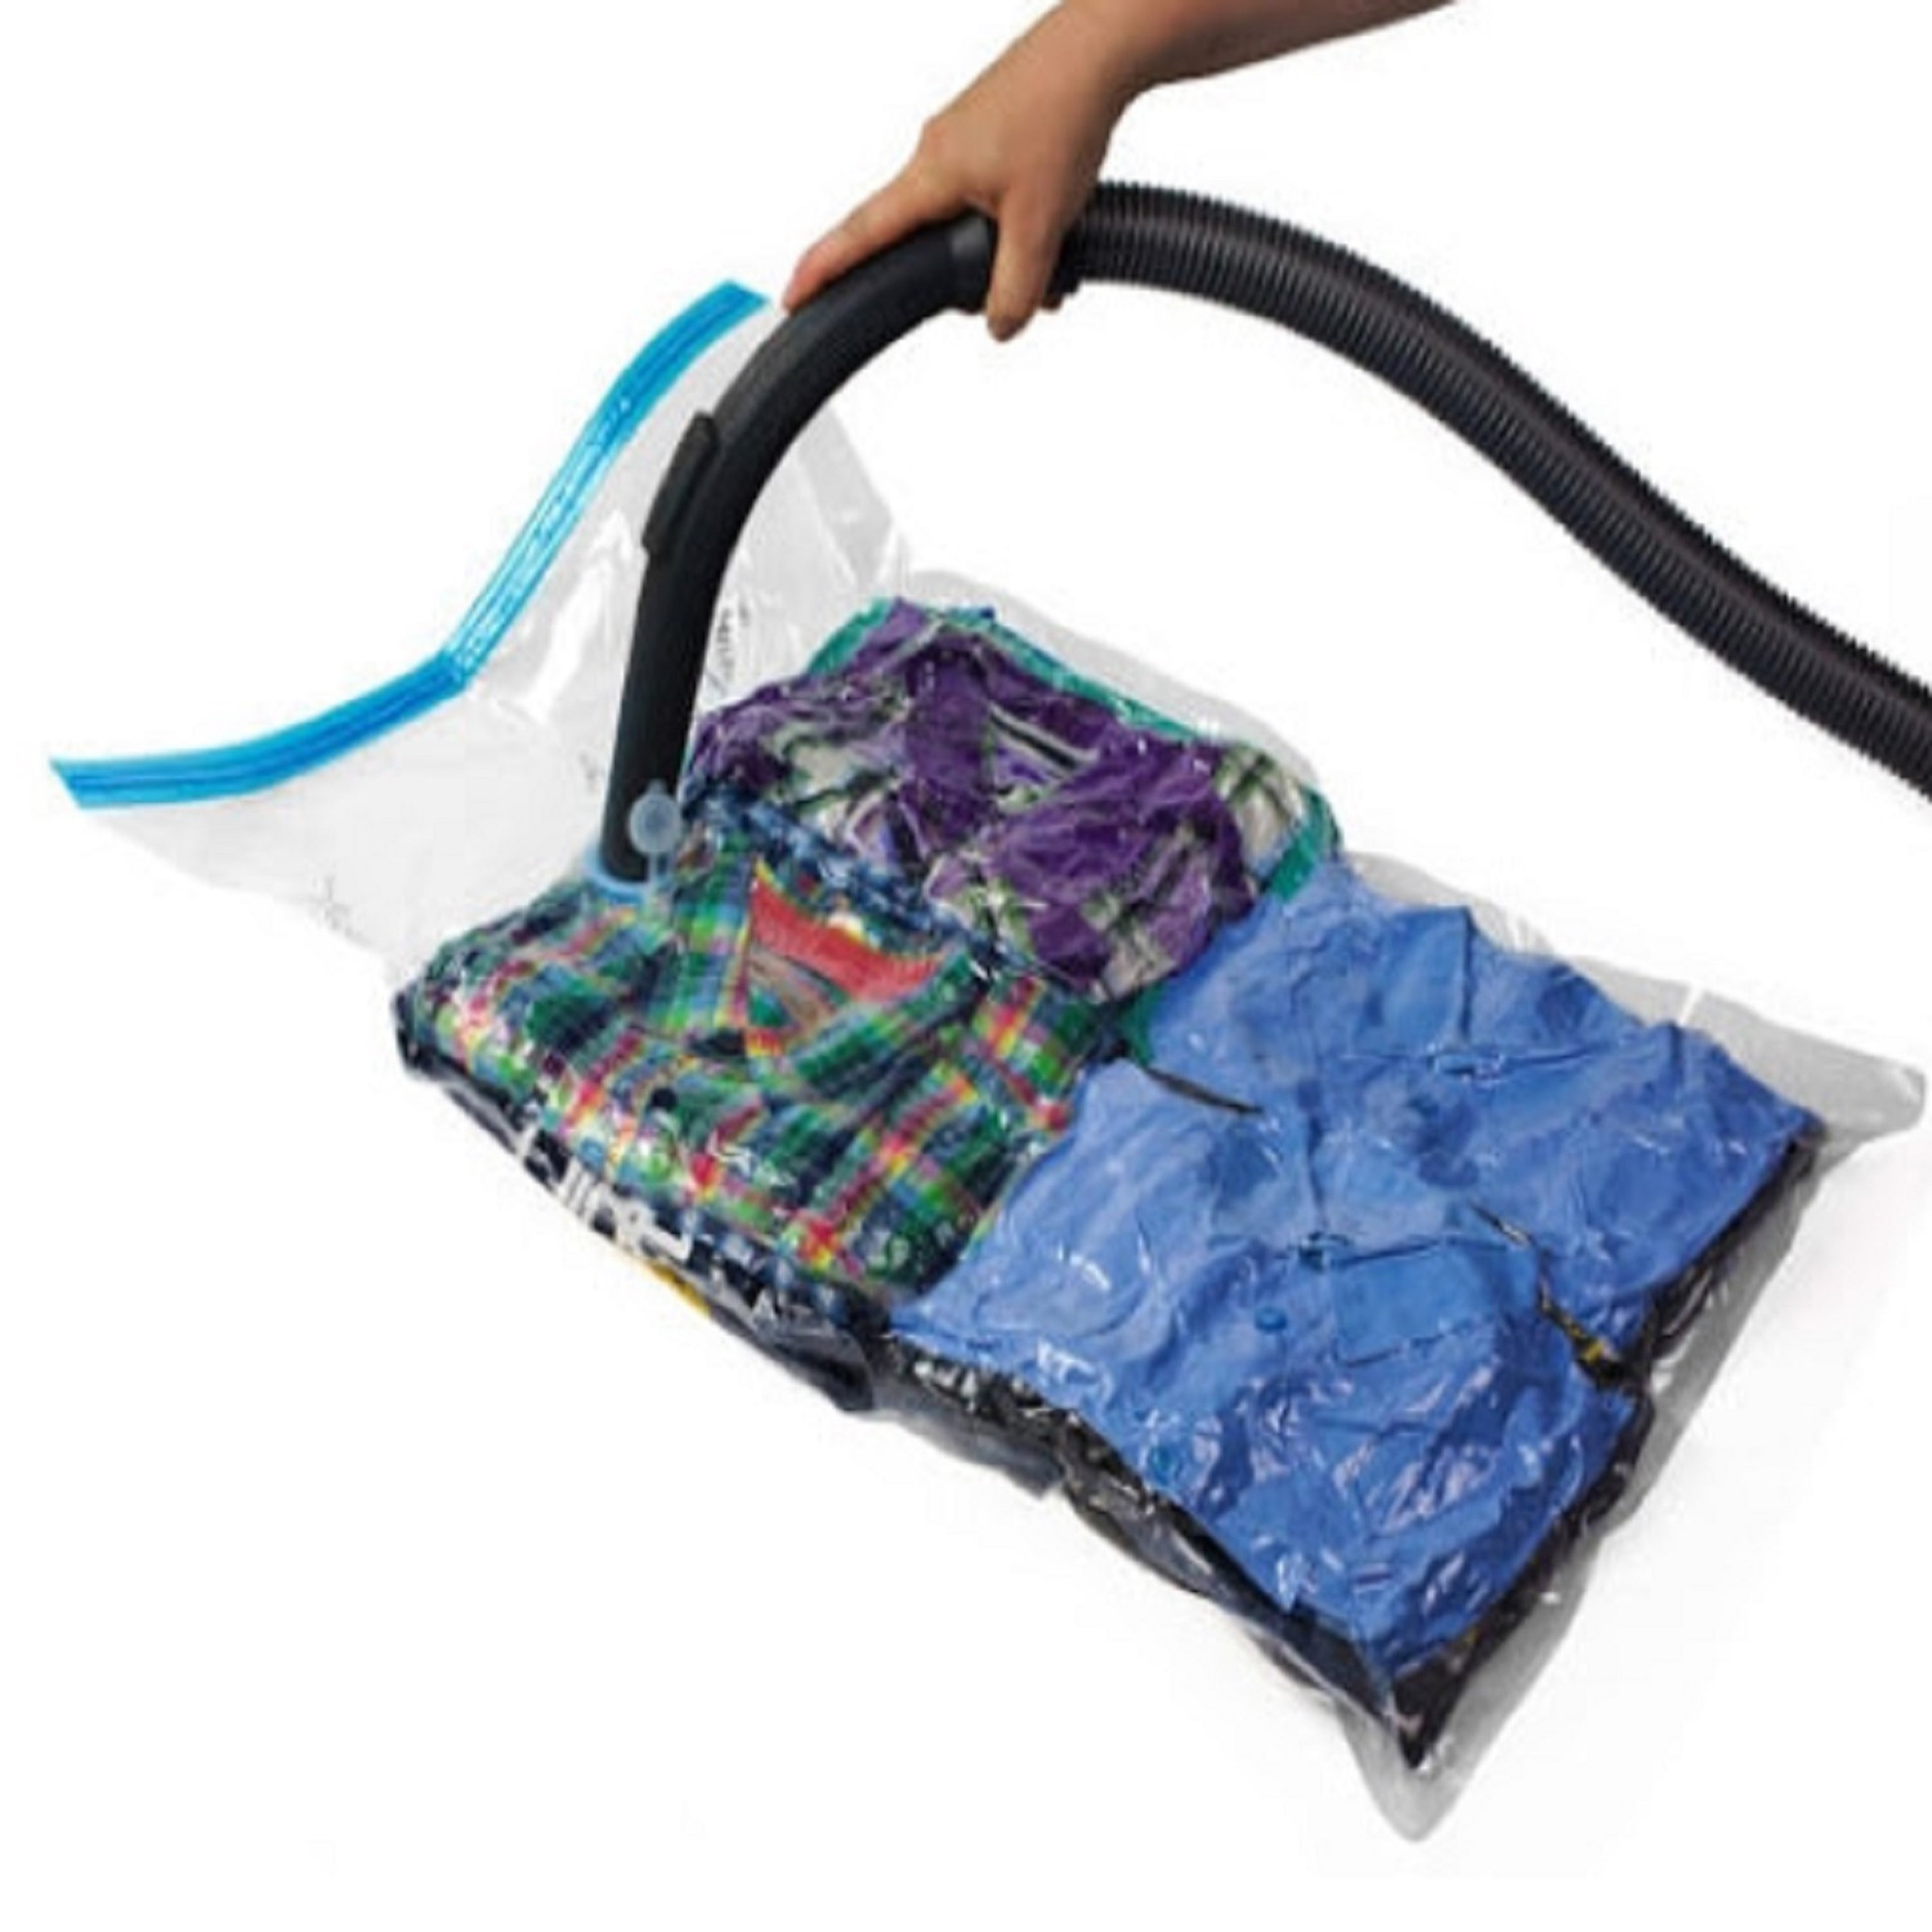 6 Pack: The Largest Super Jumbo Vacuum Seal Space Saver Storage Cleaners  Bag 40X53 Space Organizer Bag QQbed